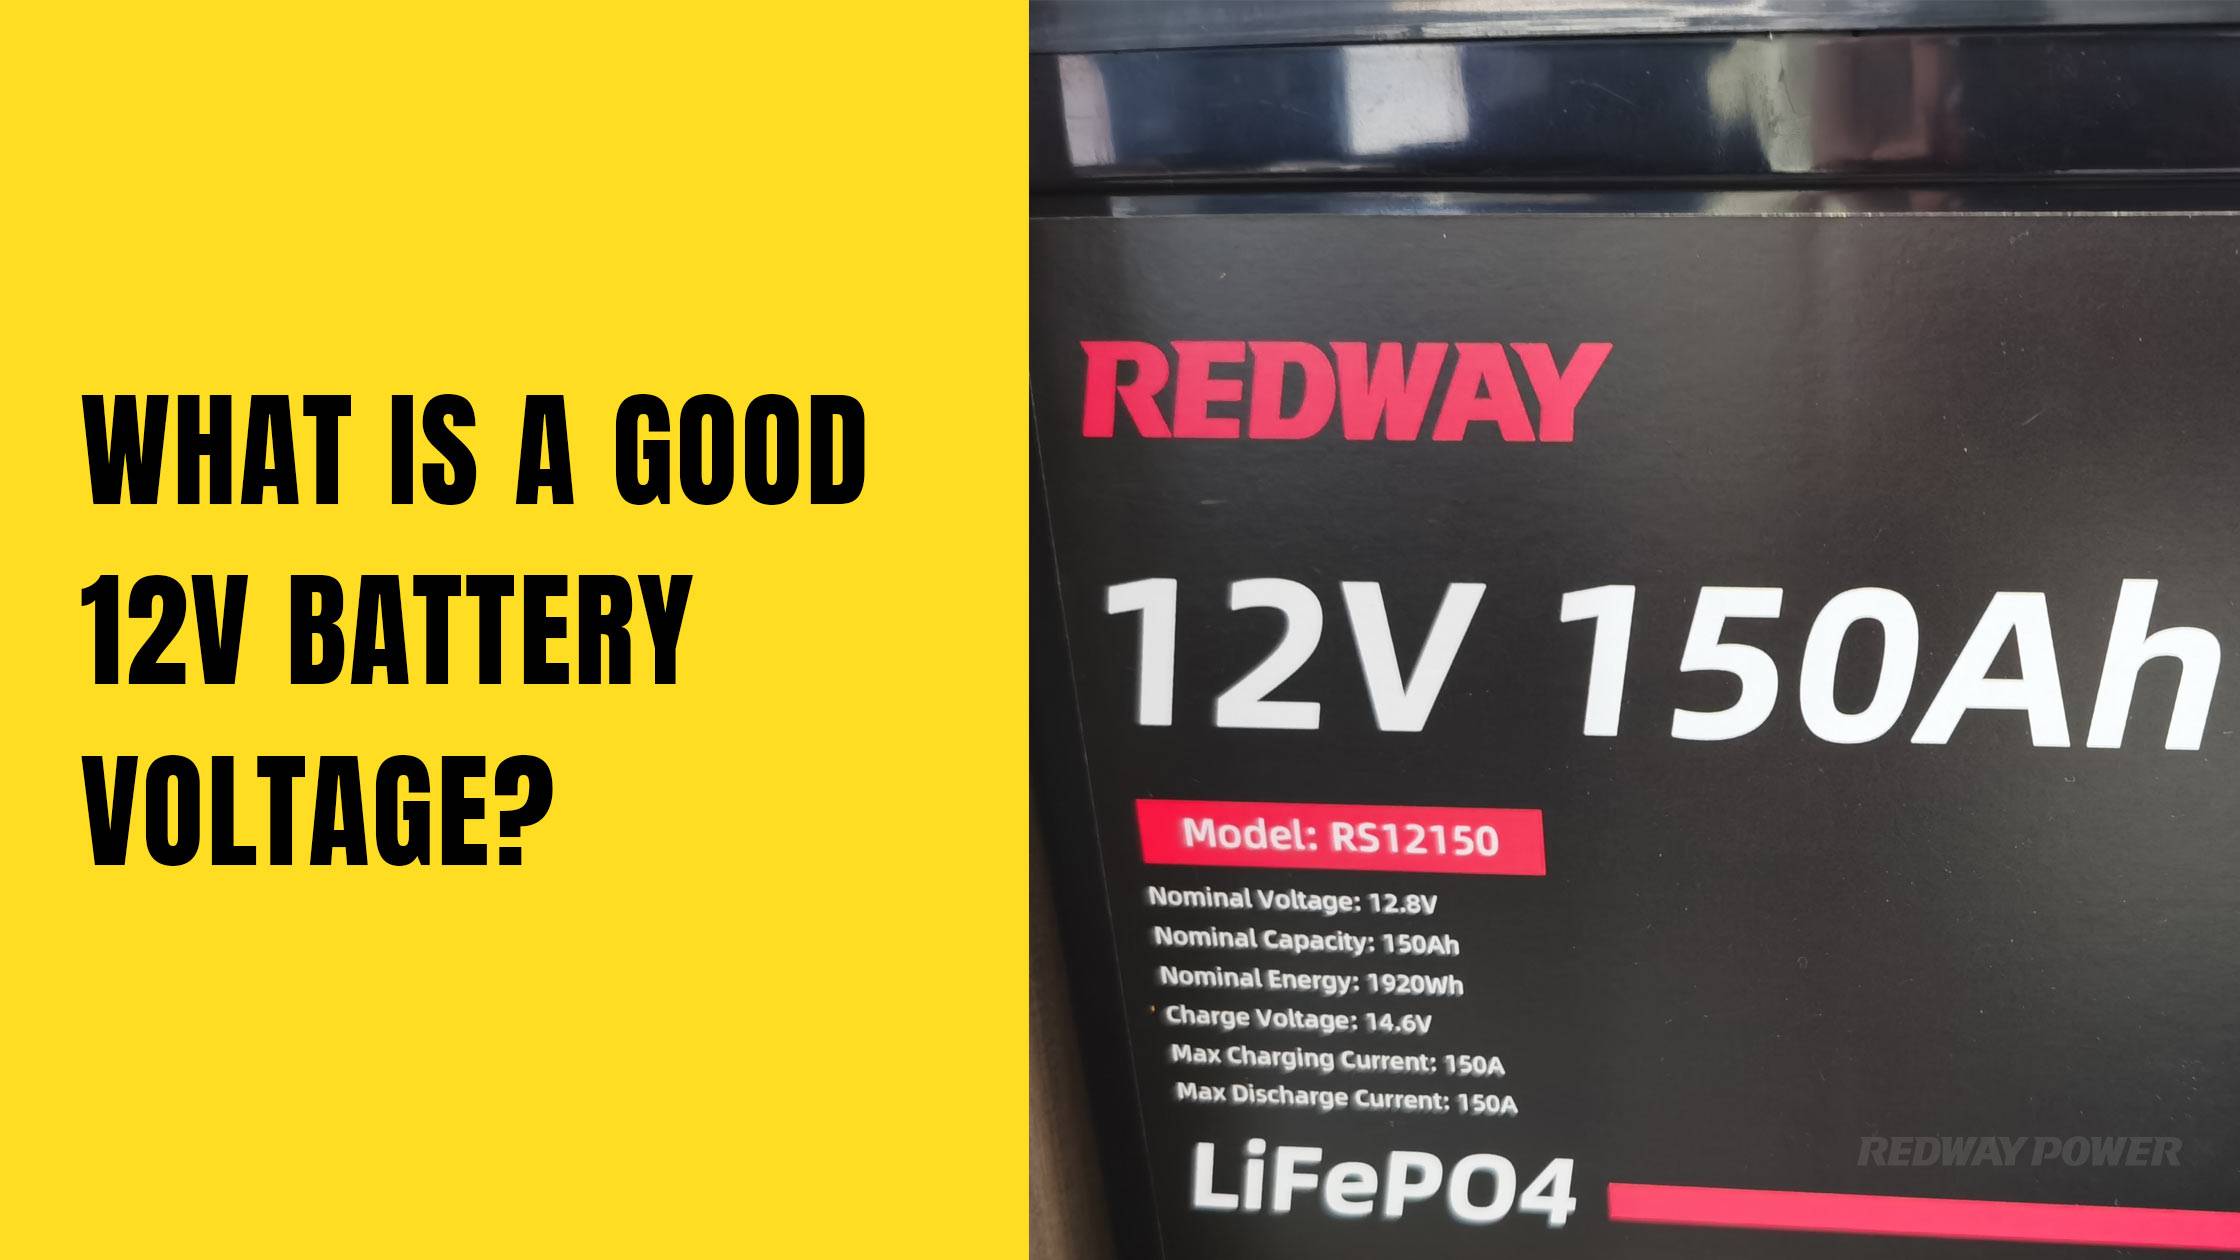 What Is A Good 12v Battery Voltage? 12v 150ah lifepo4 battery rv battery marine